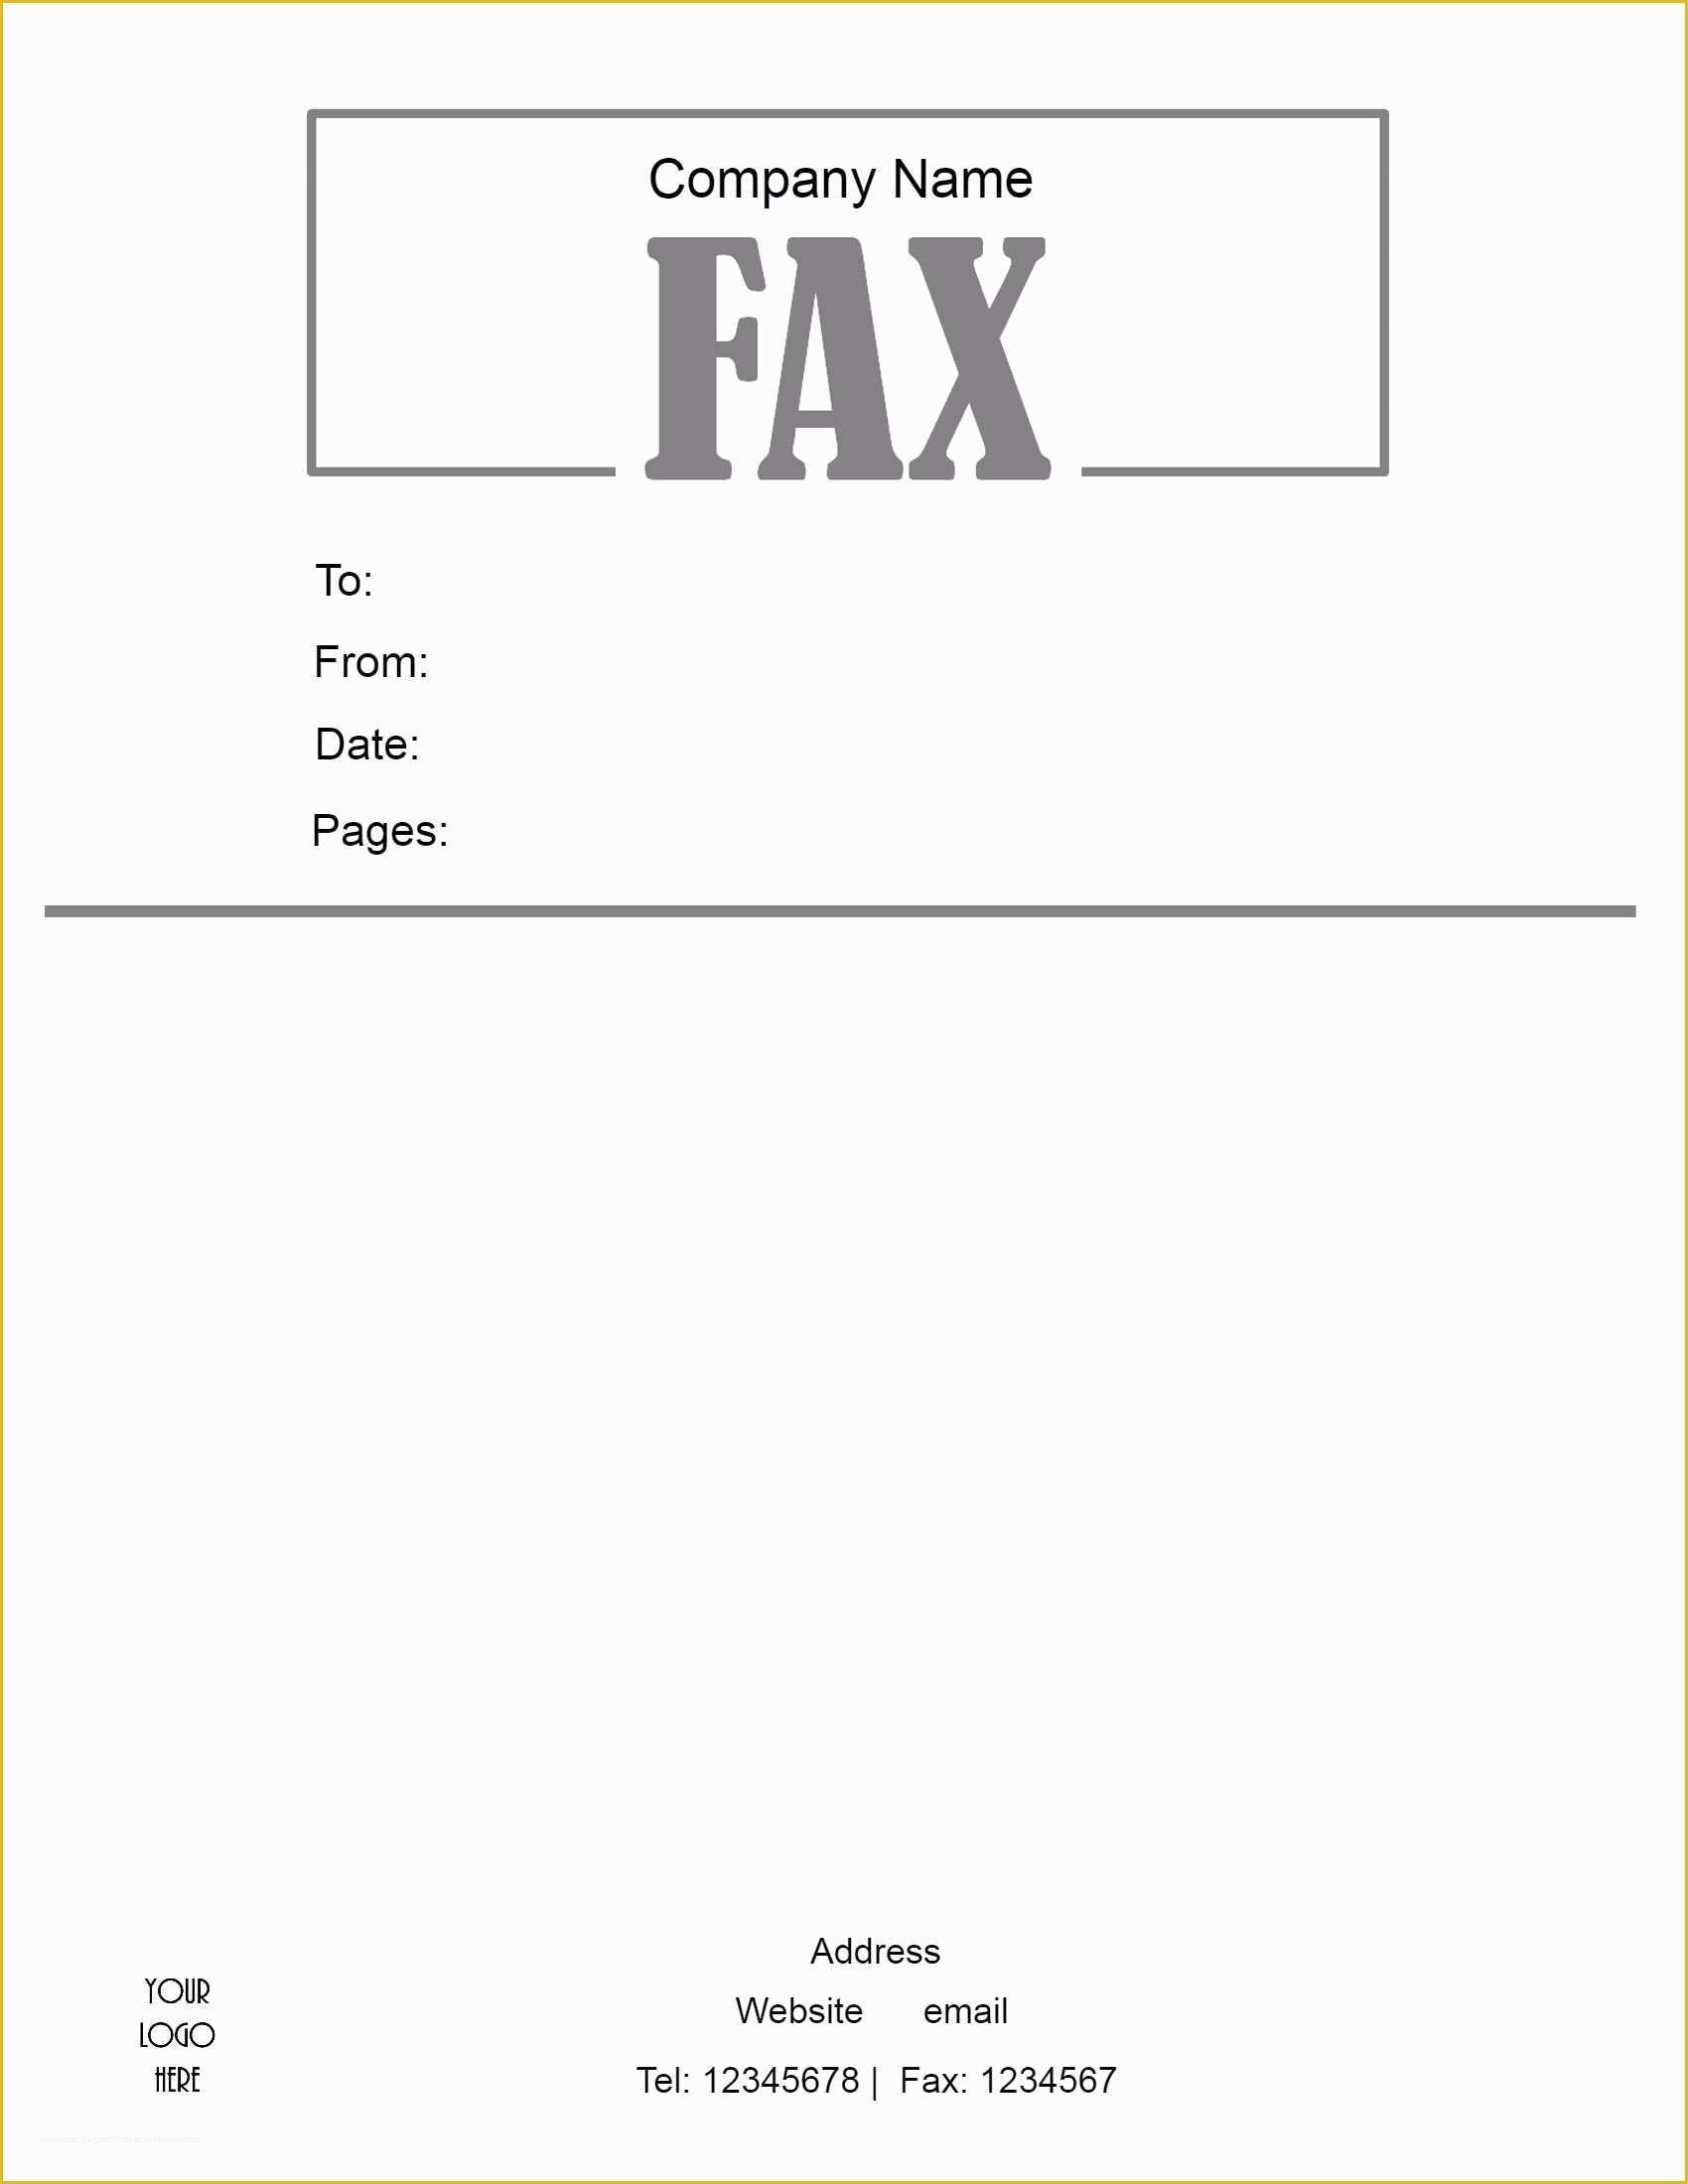 Fax Cover Sheet Template Free Of Fantastic Sample Fice Fax Cover Sheet Image Collection